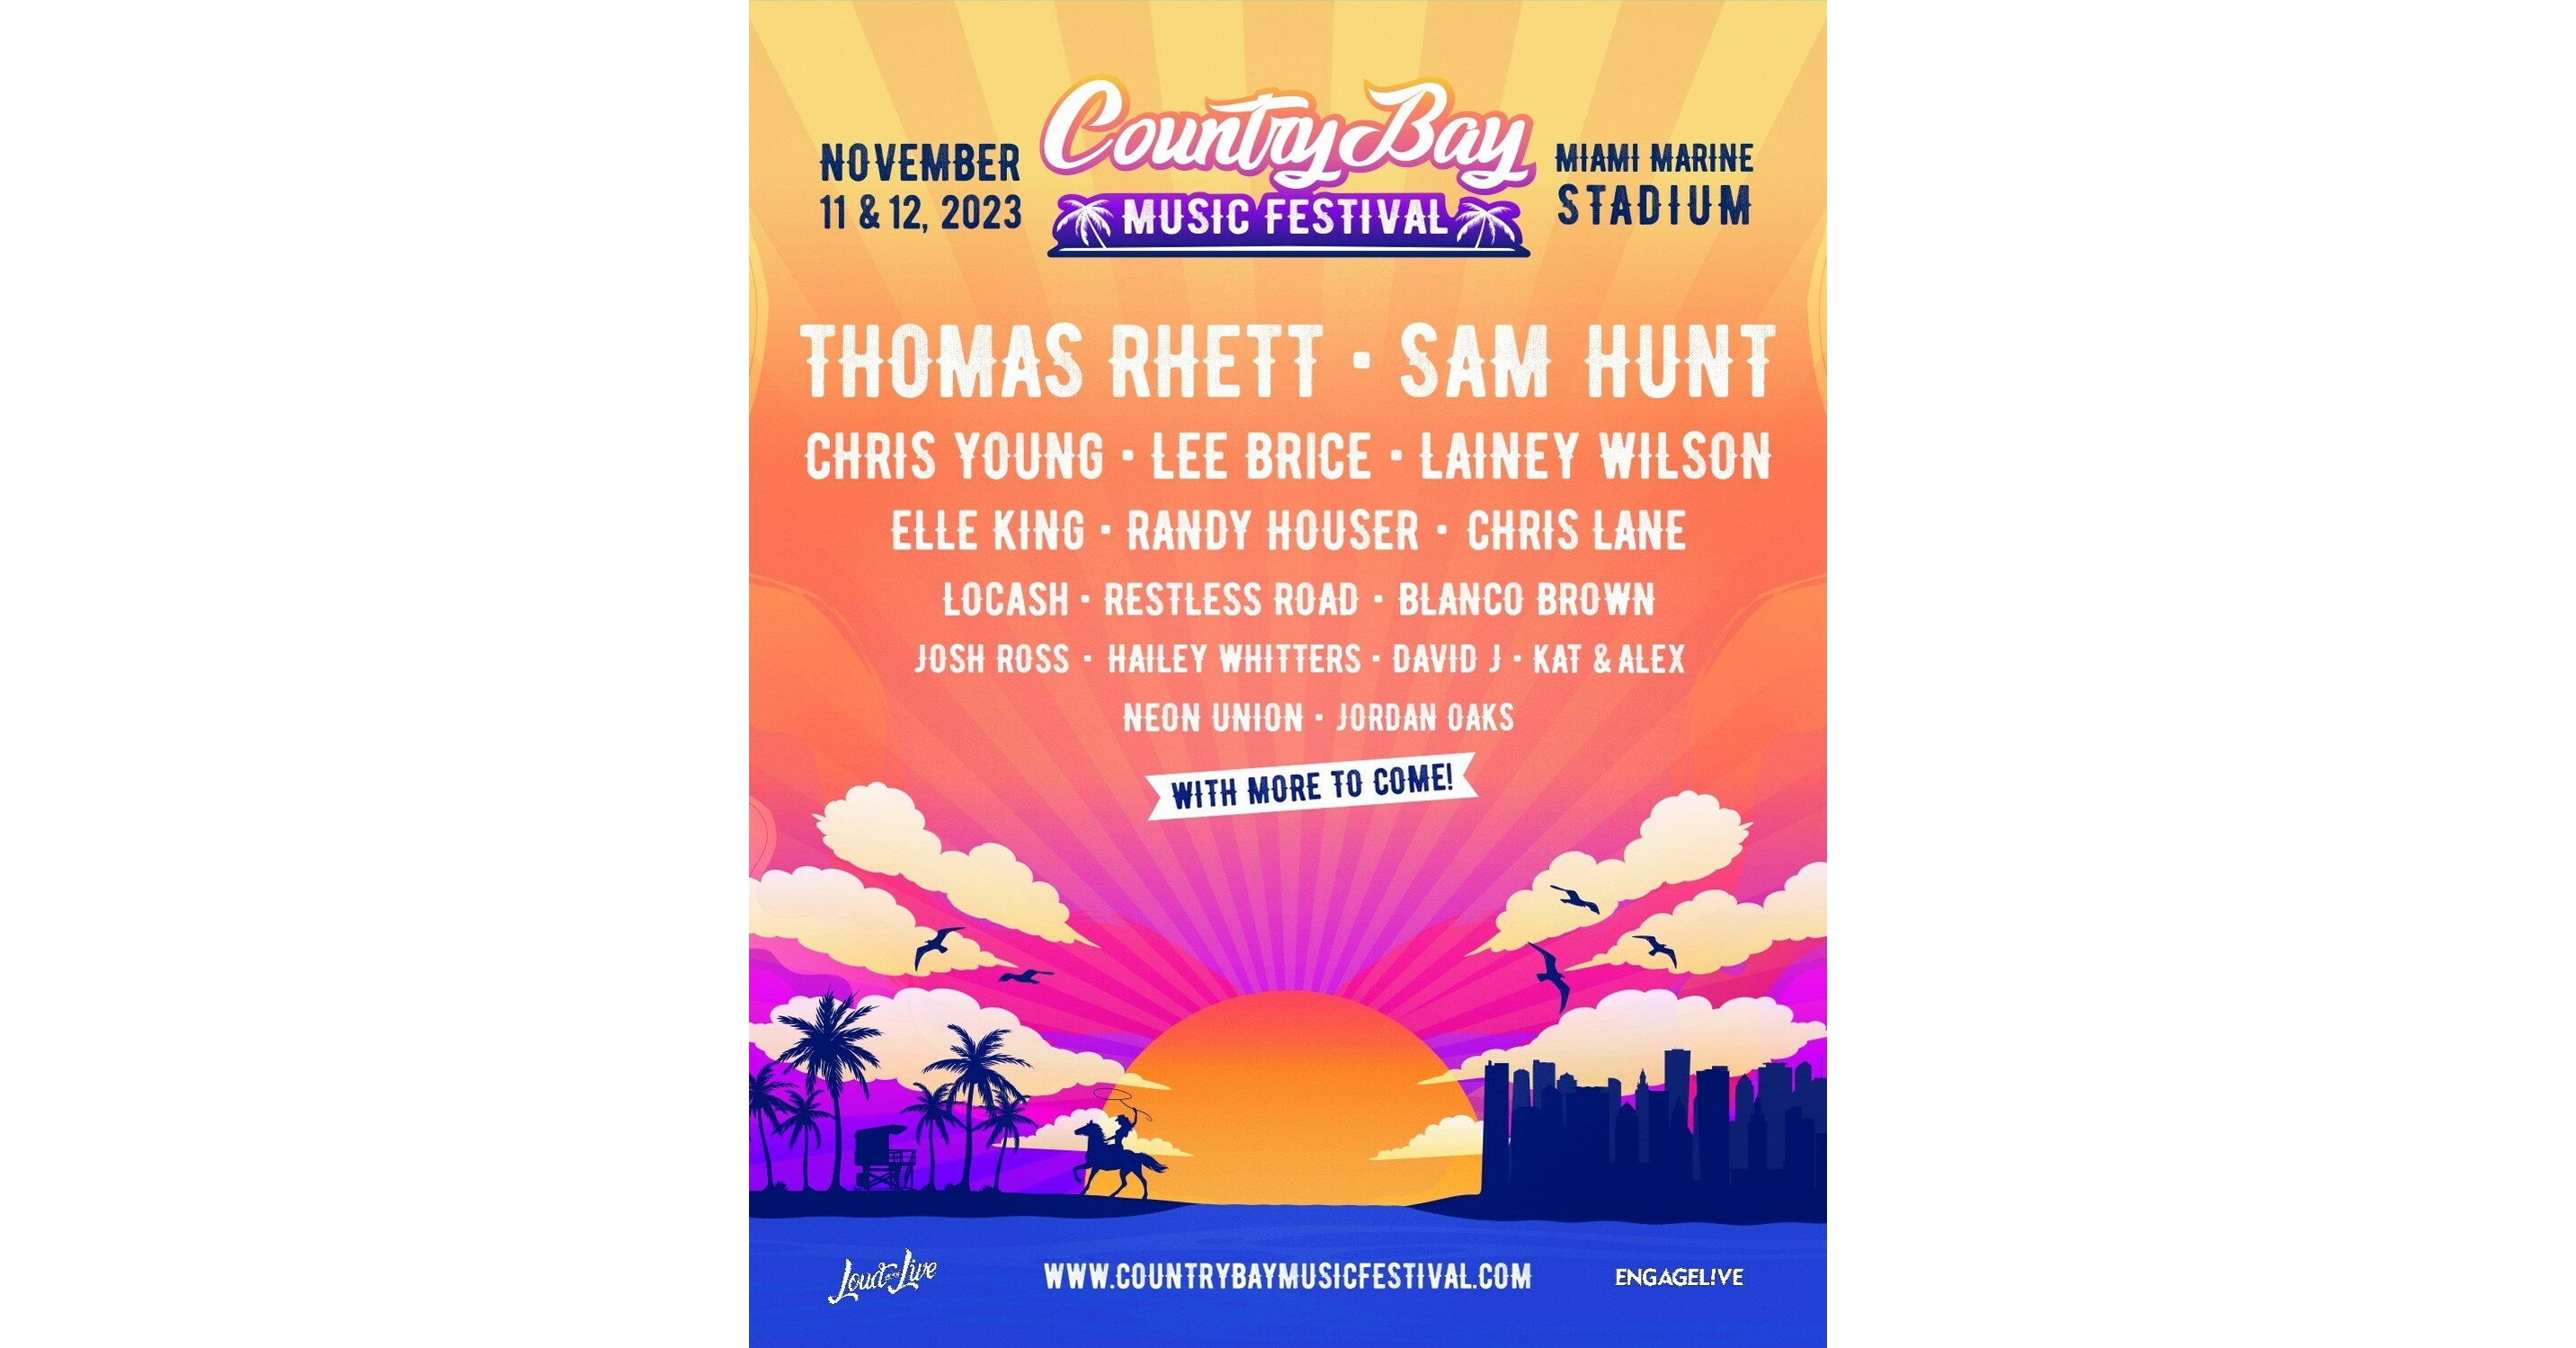 Country Bay Music Festival Brings Biggest Country Music Acts to Miami